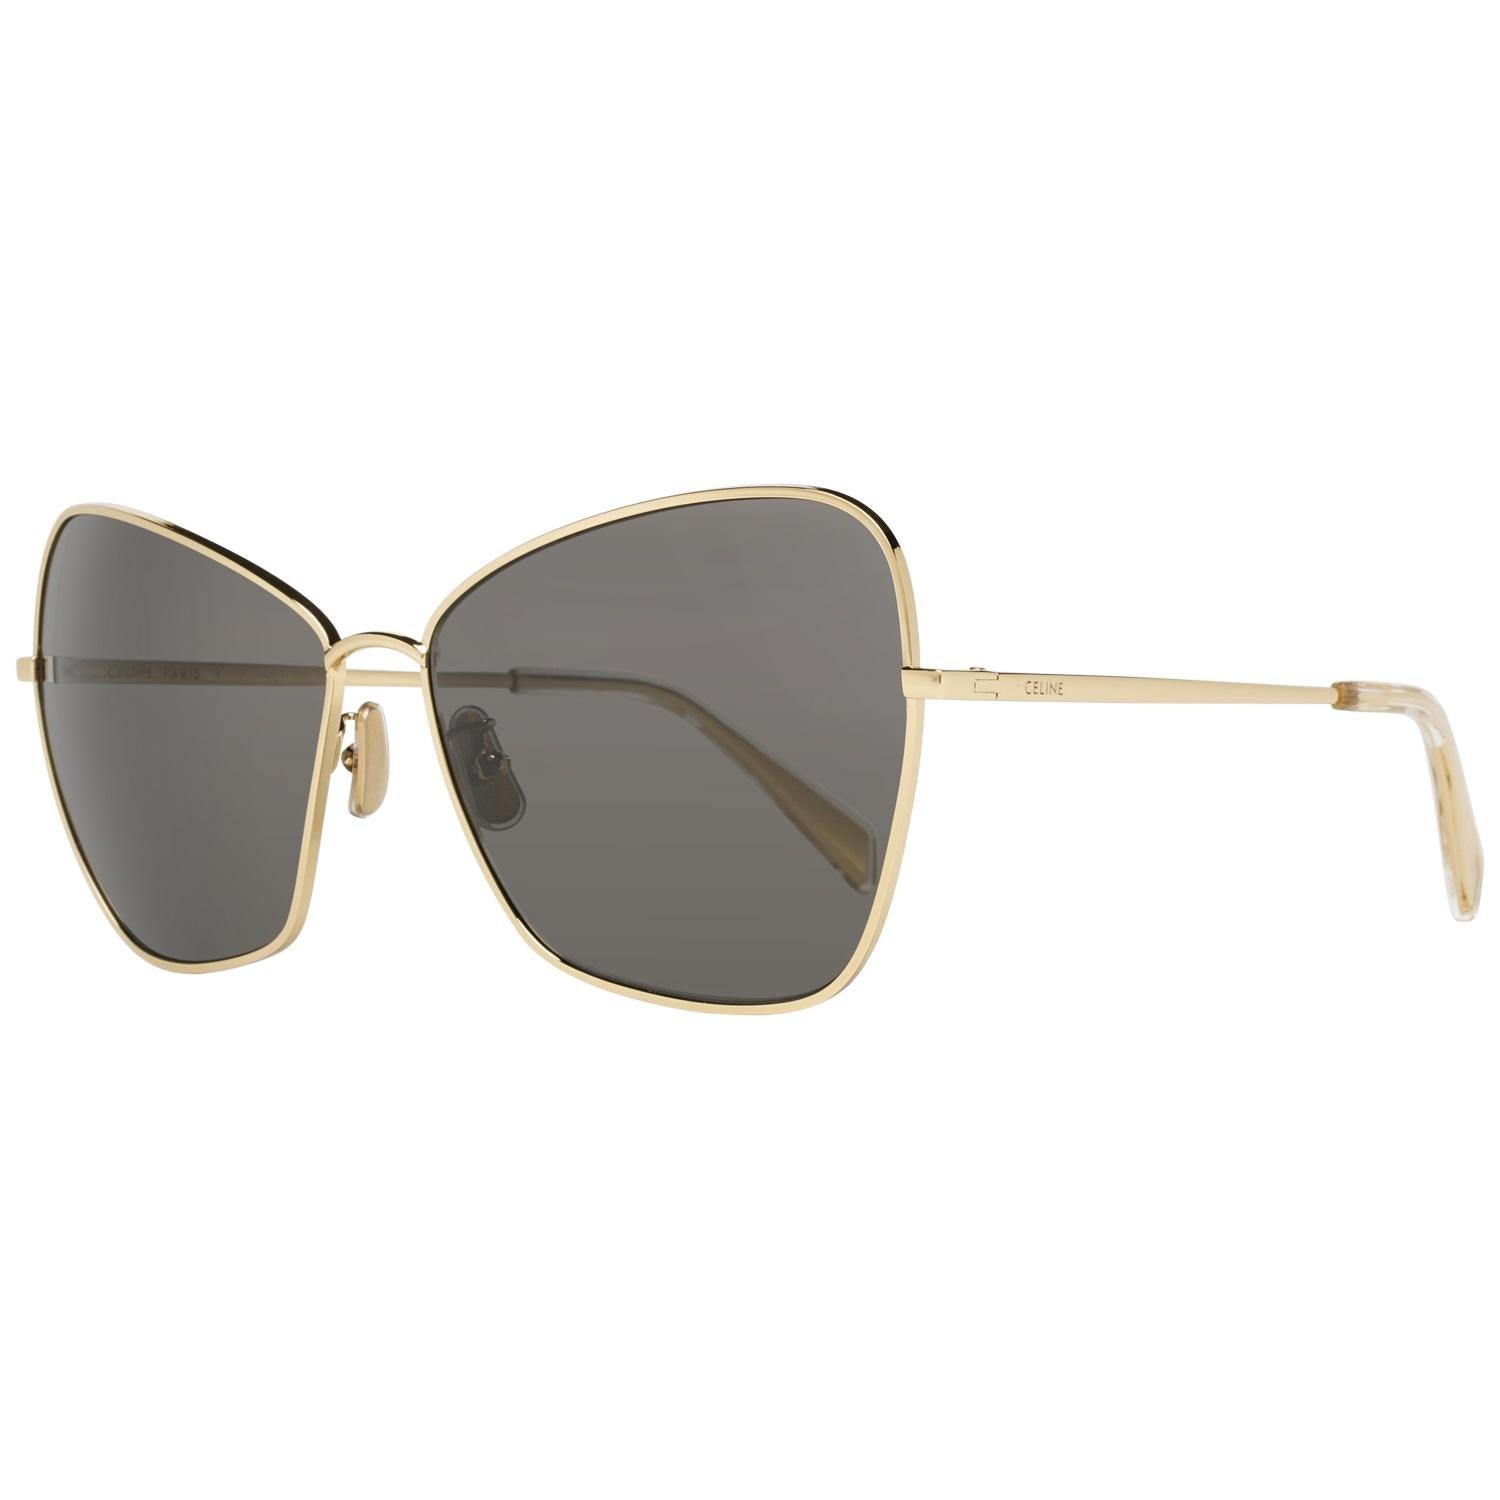 Details

MATERIAL: Metal

COLOR: Gold

MODEL: CL40080U 6430A

GENDER: Women

COUNTRY OF MANUFACTURE: Italy

TYPE: Sunglasses

ORIGINAL CASE?: Yes

STYLE: Butterfly

OCCASION: Casual

FEATURES: Lightweight

LENS COLOR: Grey

LENS TECHNOLOGY: No